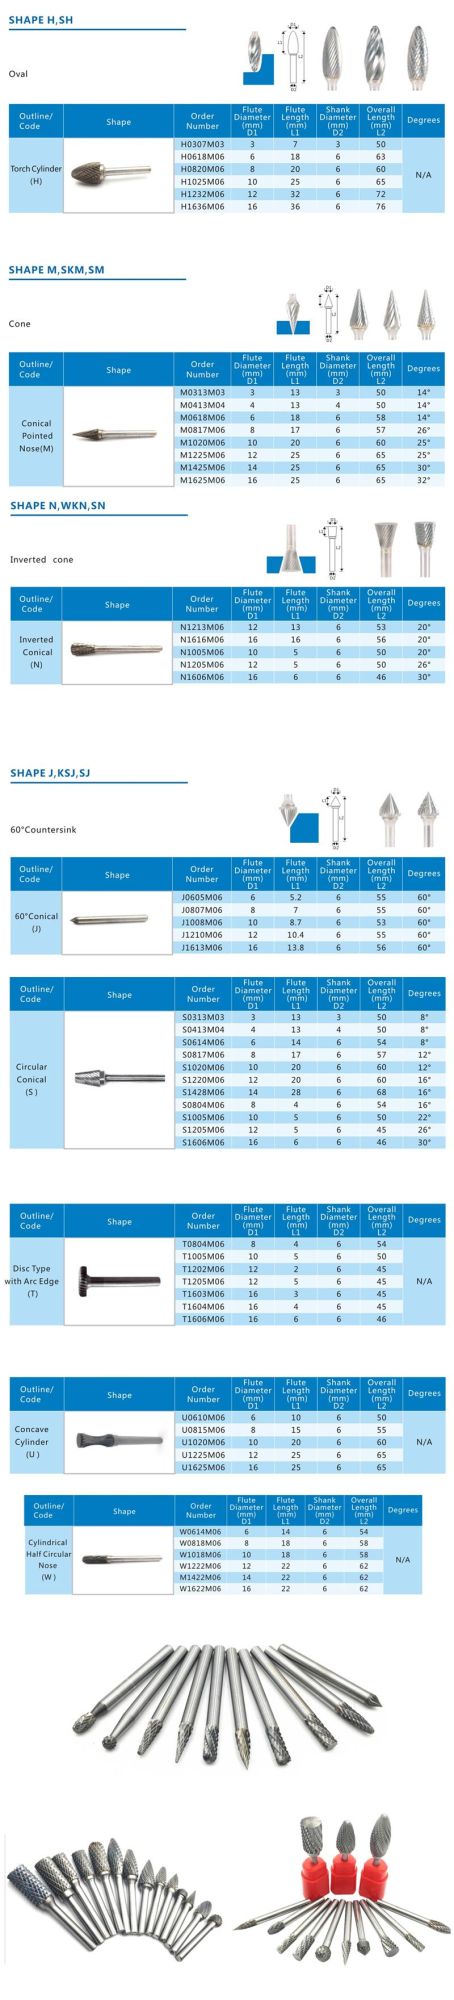 Kud Ball Head Cemented Carbide Rotary Files for Grinding Metal